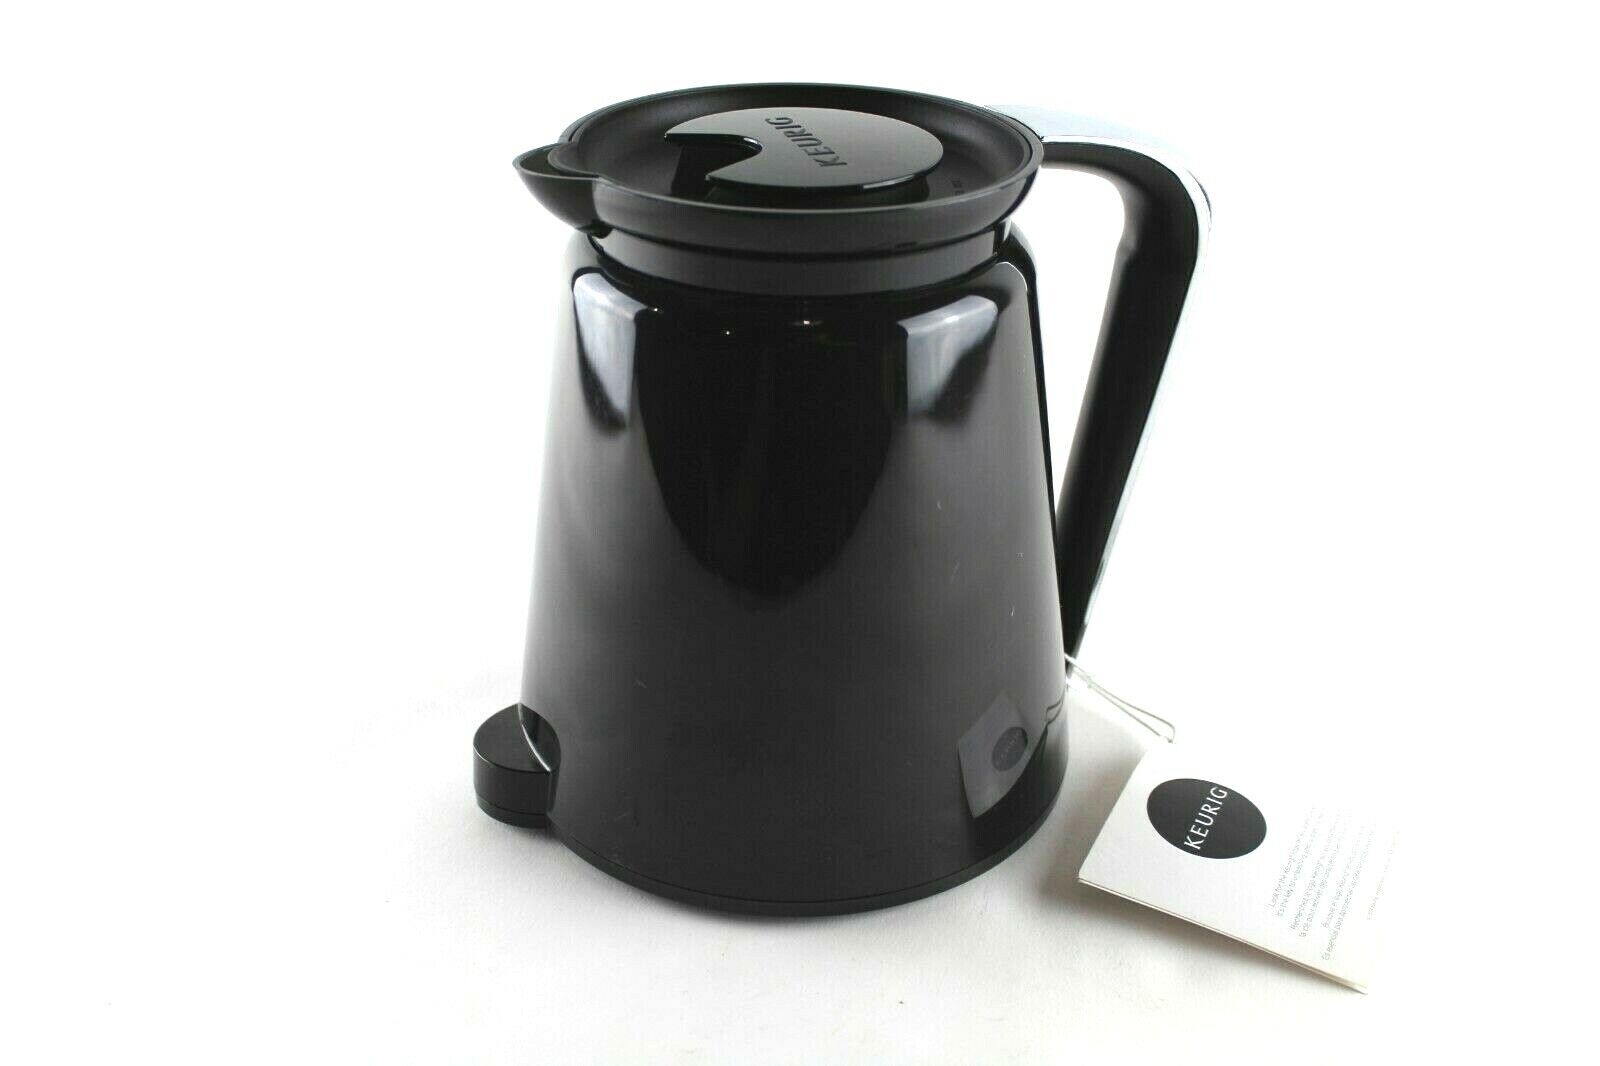 Keurig 2.0 Carafe Coffee Maker Replacement Pot Black With Chrome Handle NEW